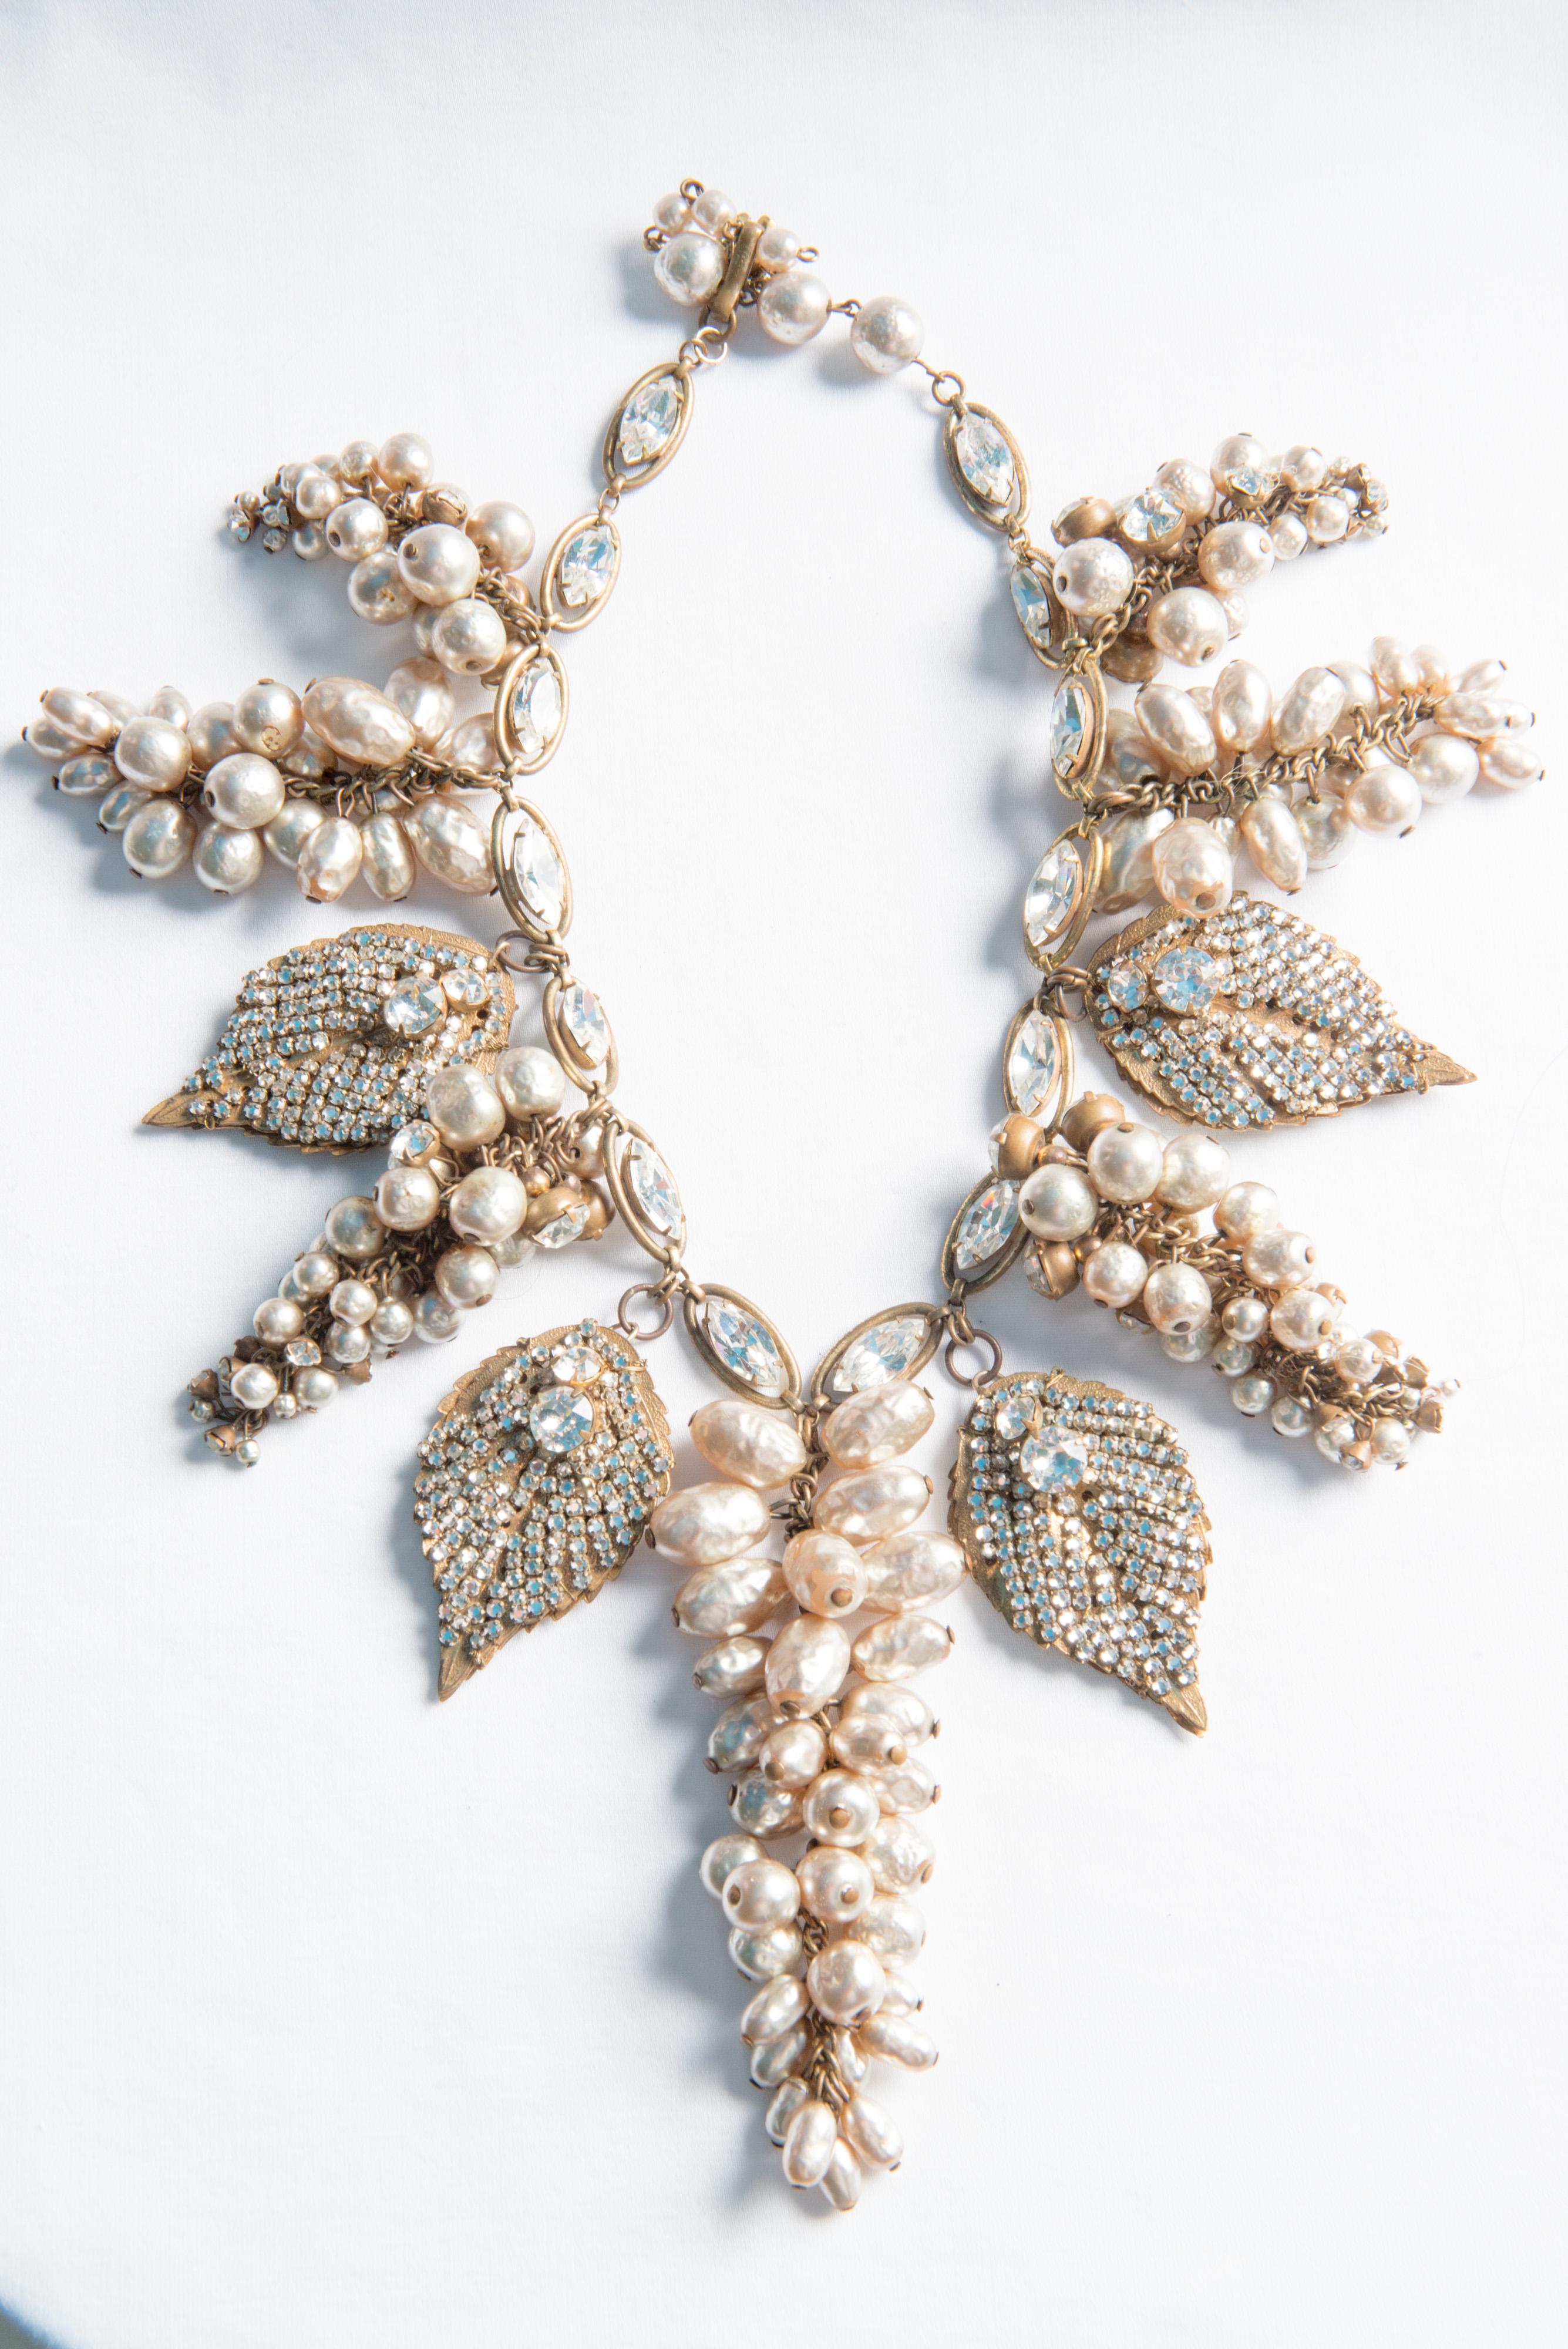 A stunning Miriam Haskell rhinestone gilt leaves and silvered pearl necklace and earring set.
Earrings are 1.25